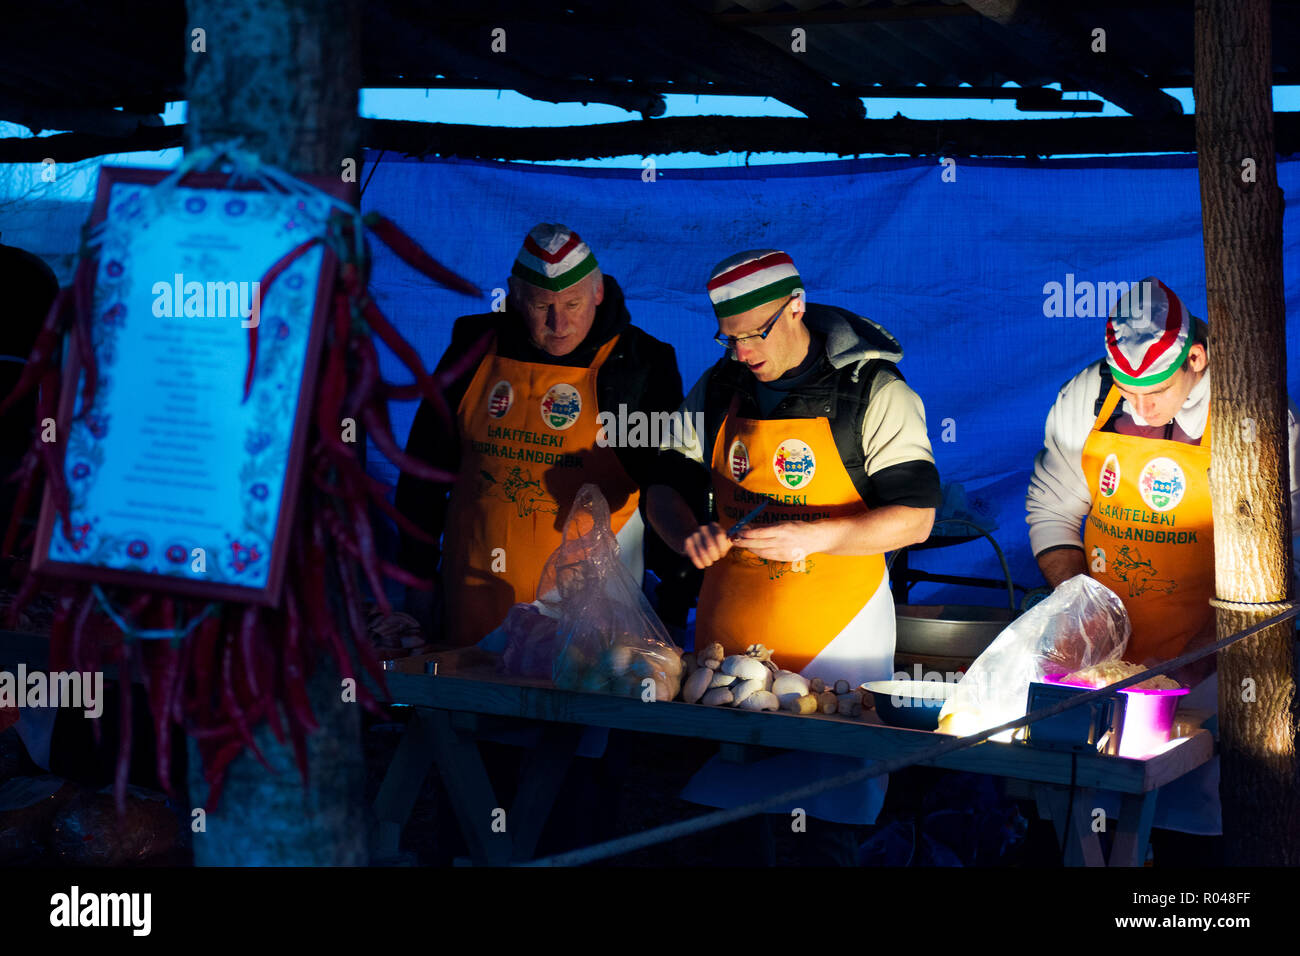 Hecha, Ukraine - JAN 27, 2018: Pork butchers competition. hungarian team discussion while preparing ingredients, early in the morning before festival  Stock Photo